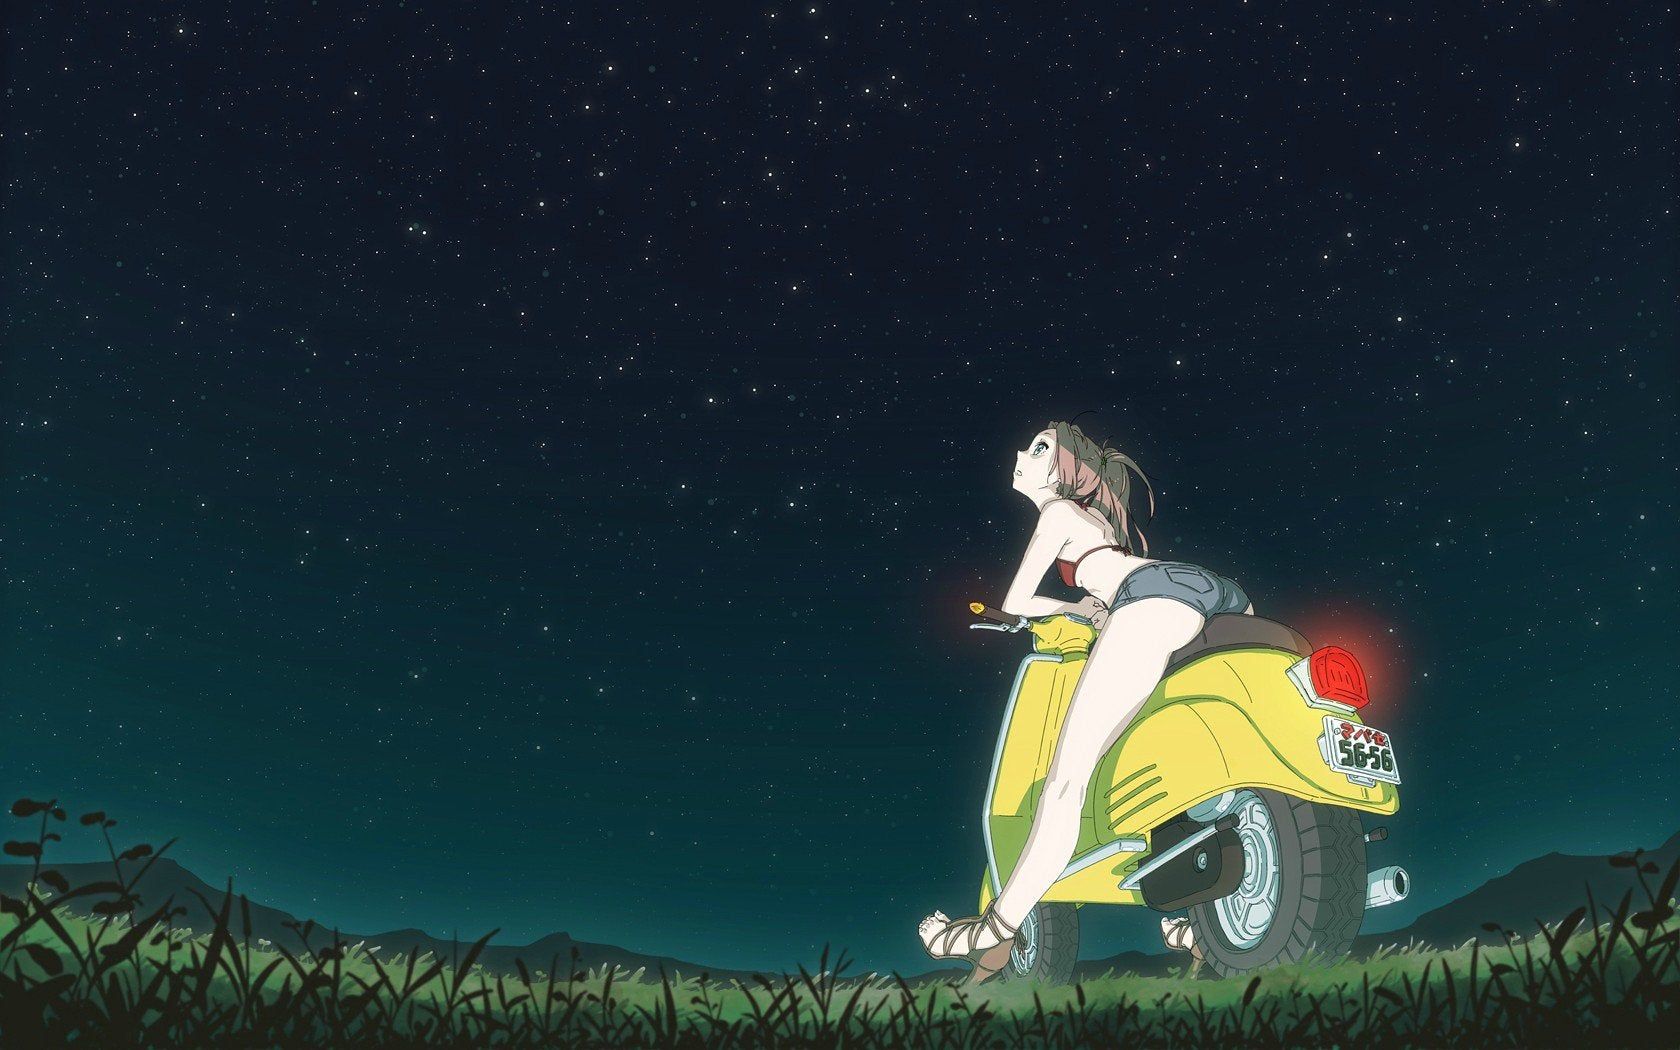 Anime girl looking at stars [Could I get the name of the author?]